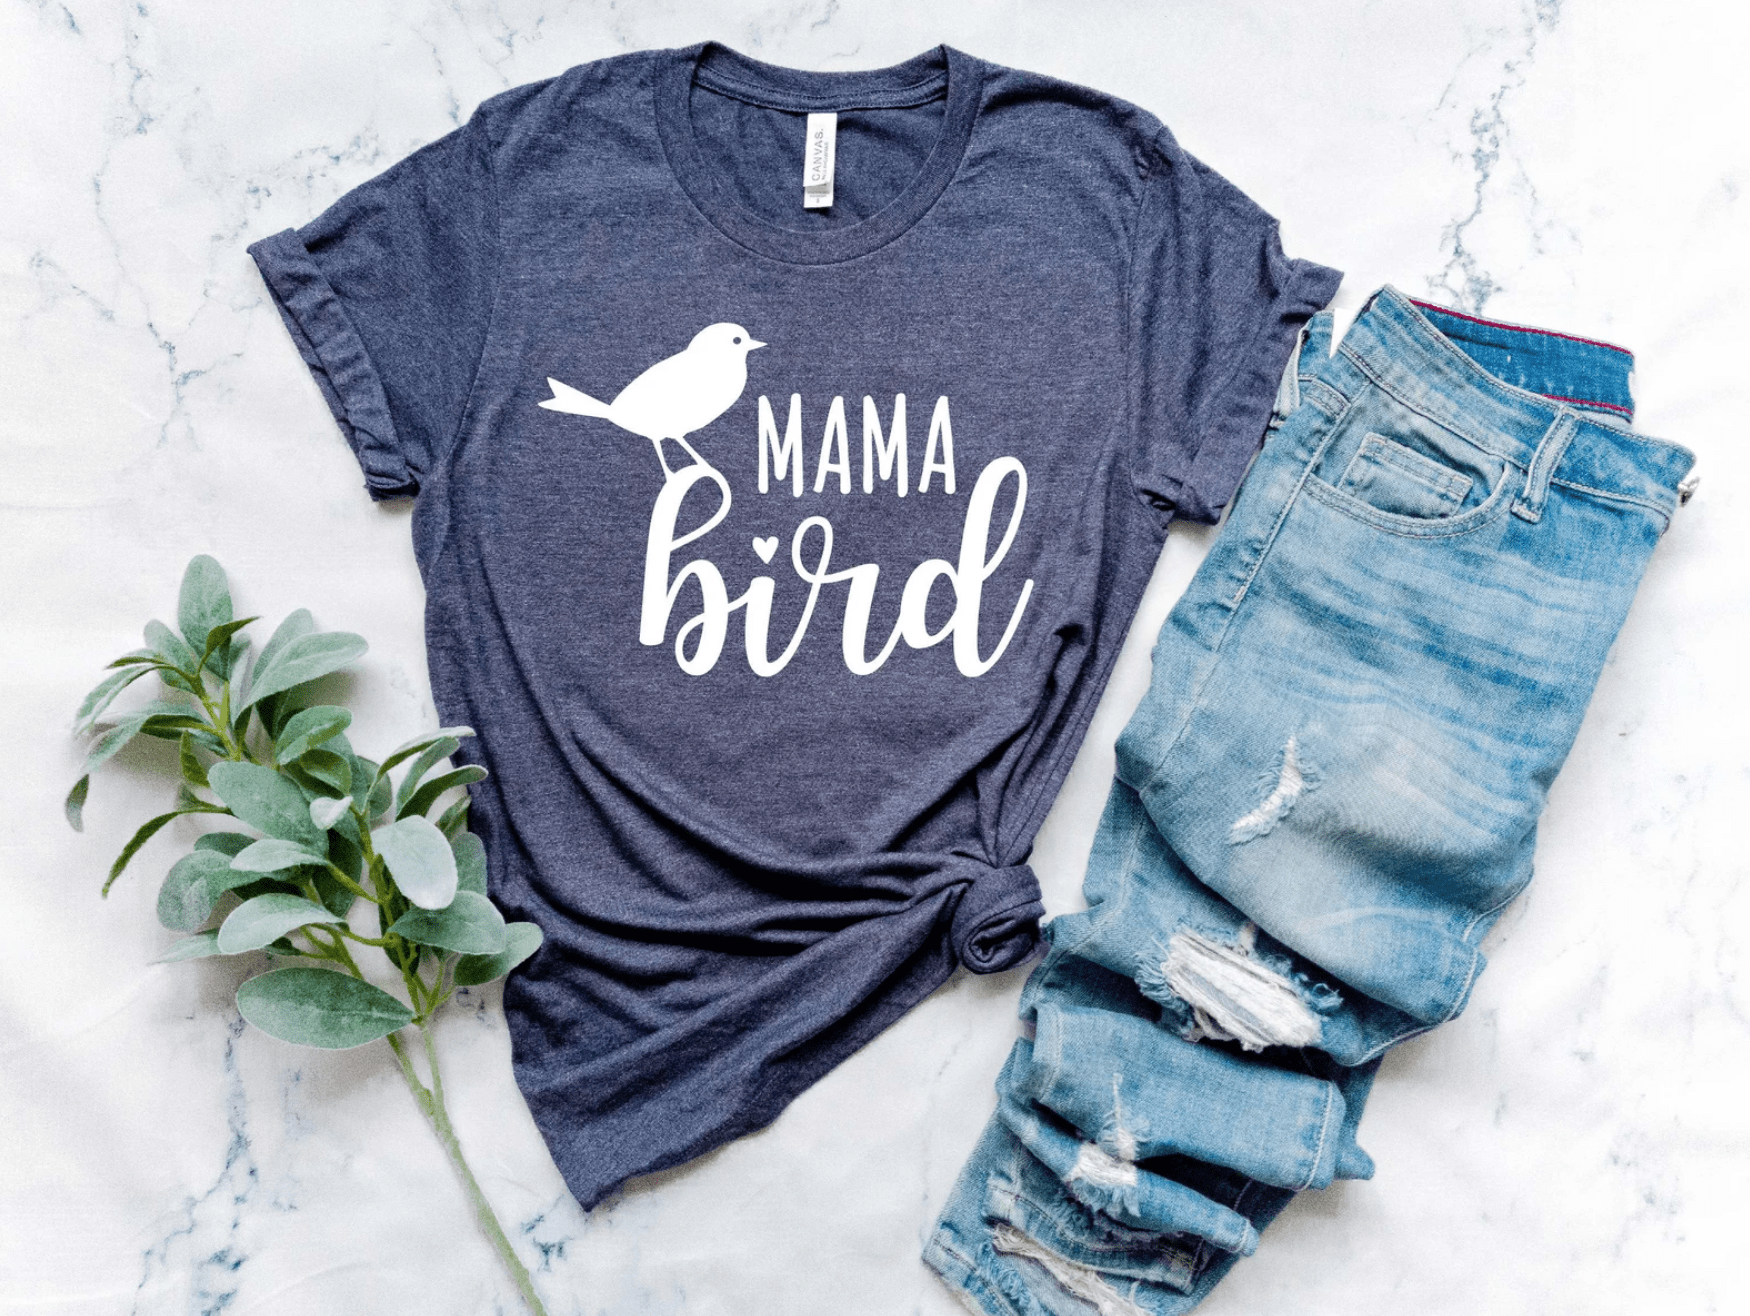 13 Bird Themed Gifts That Are Perfect for Mother's Day